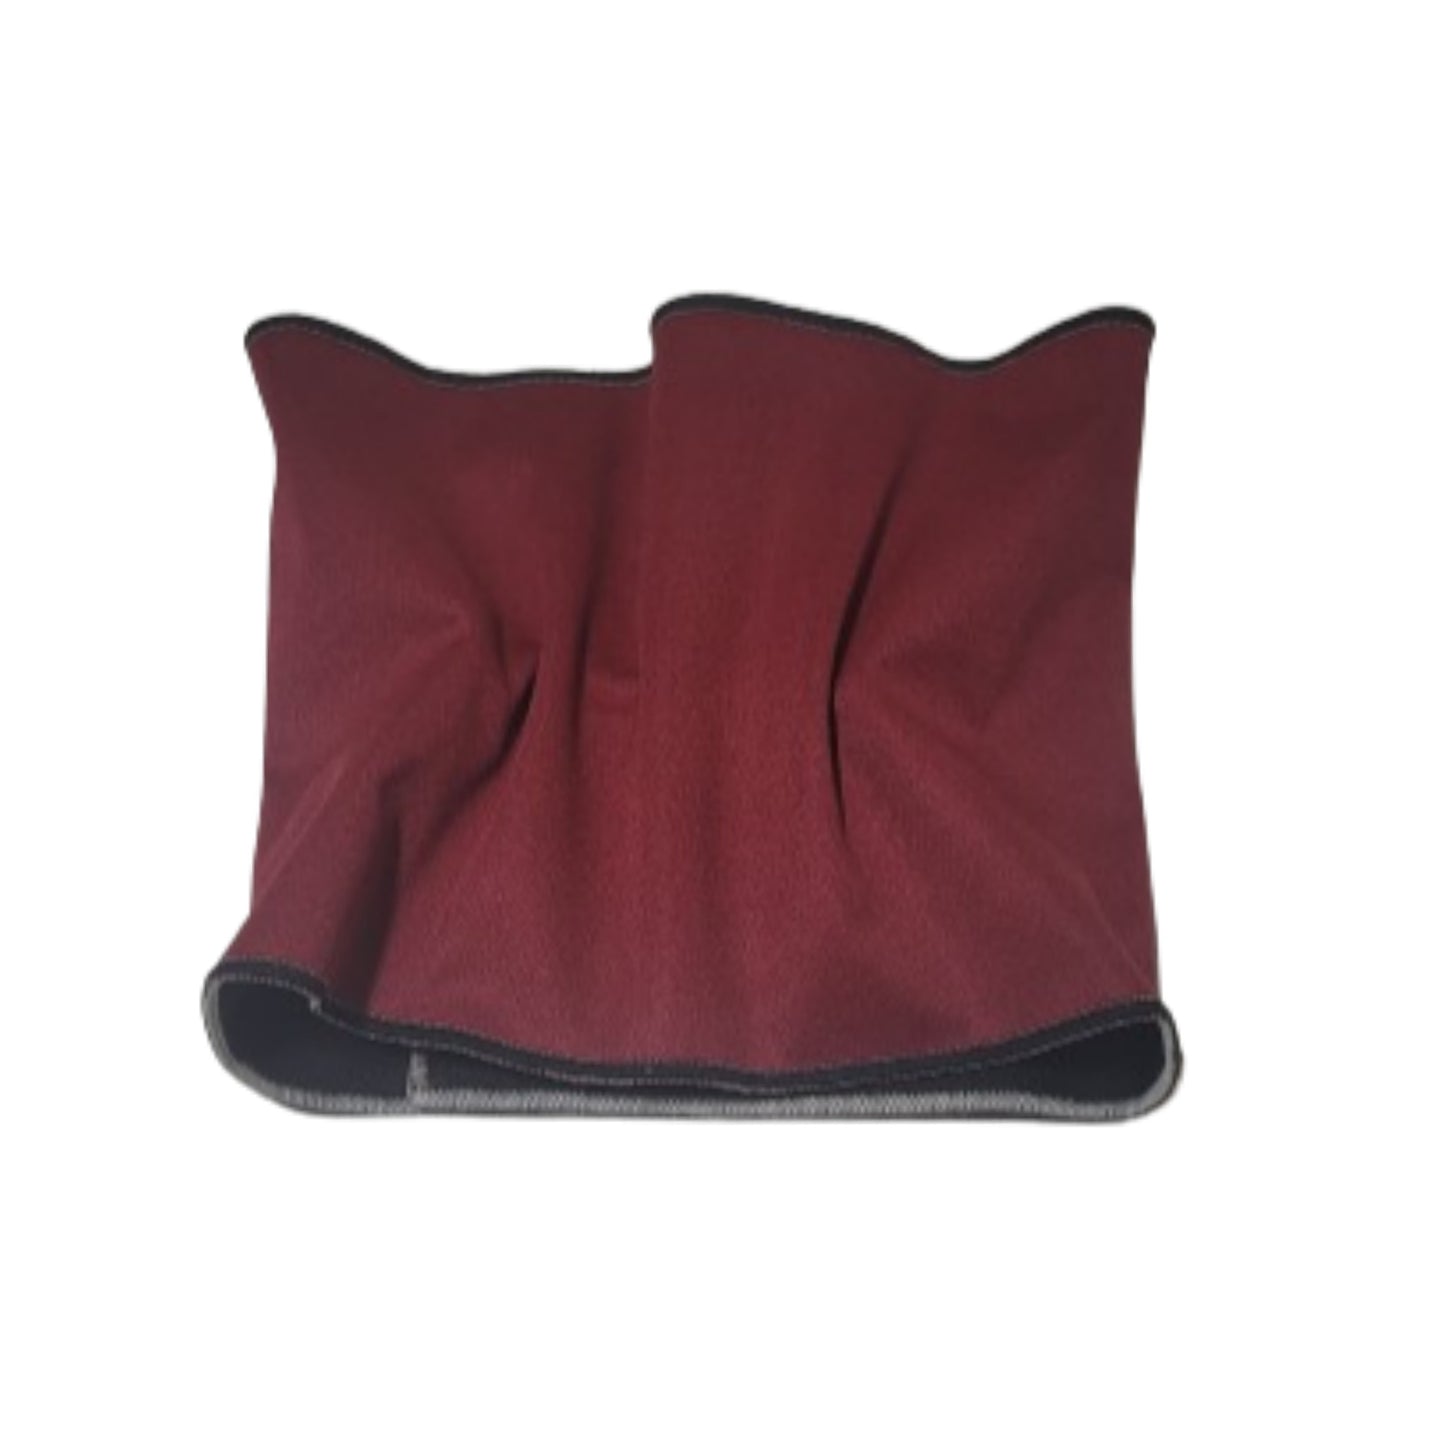 Male Dog Belly Band Wrap - Burgundy  Style #1